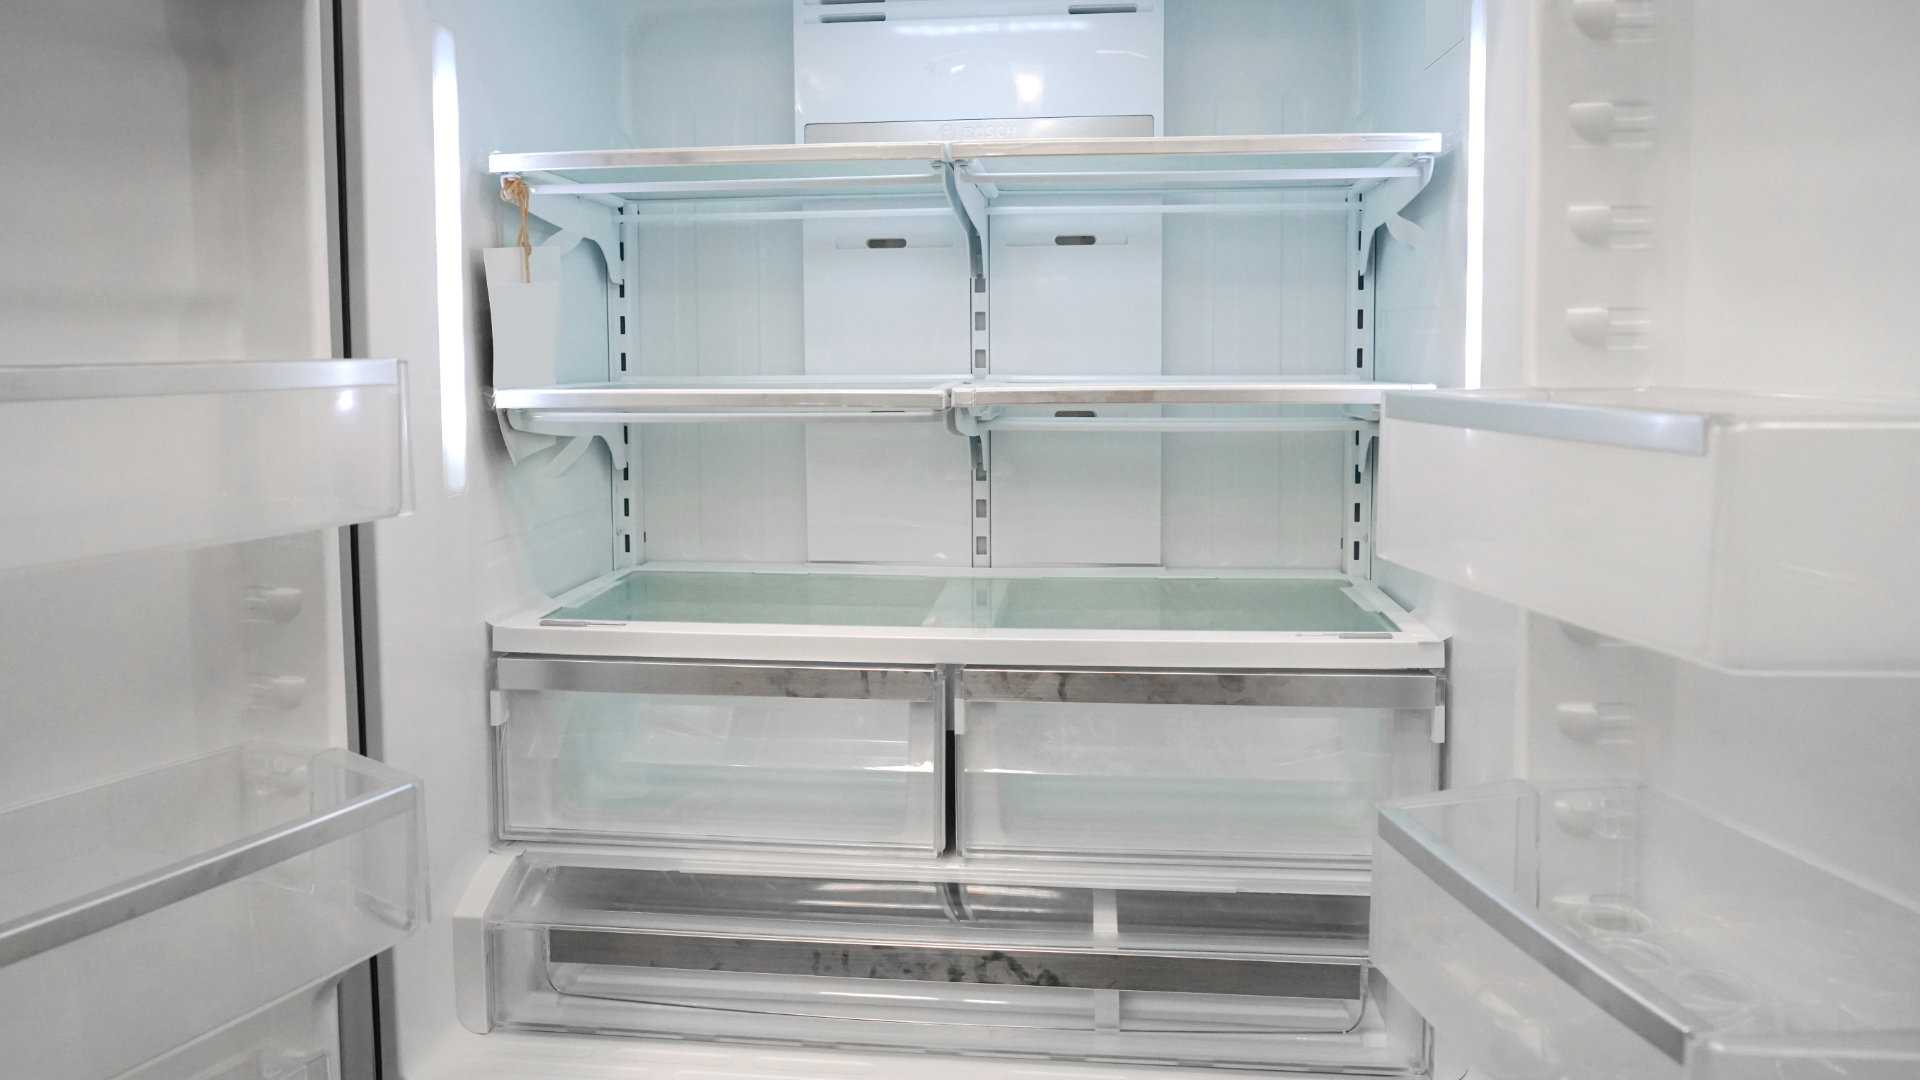 Featured image for “6 Reasons Your LG Refrigerator Is Not Making Ice”